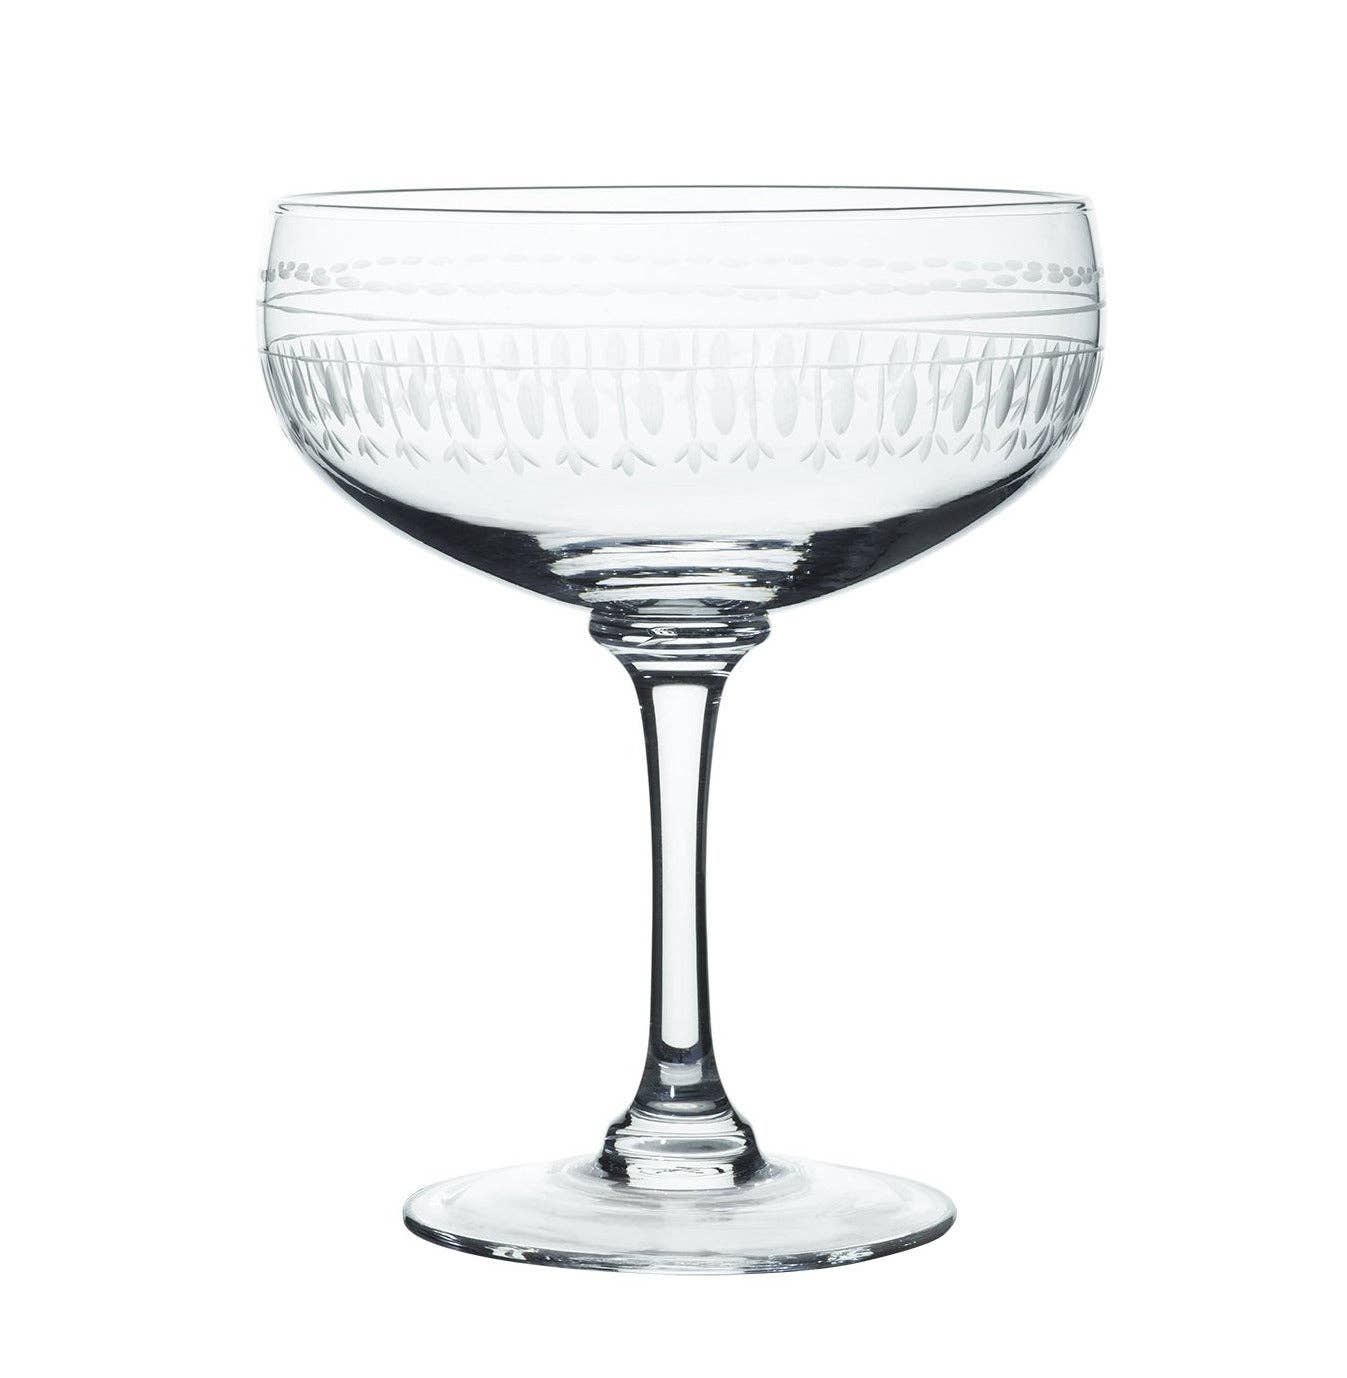 The Vintage List - A Set of Four Crystal Cocktail Glasses with Ovals Design